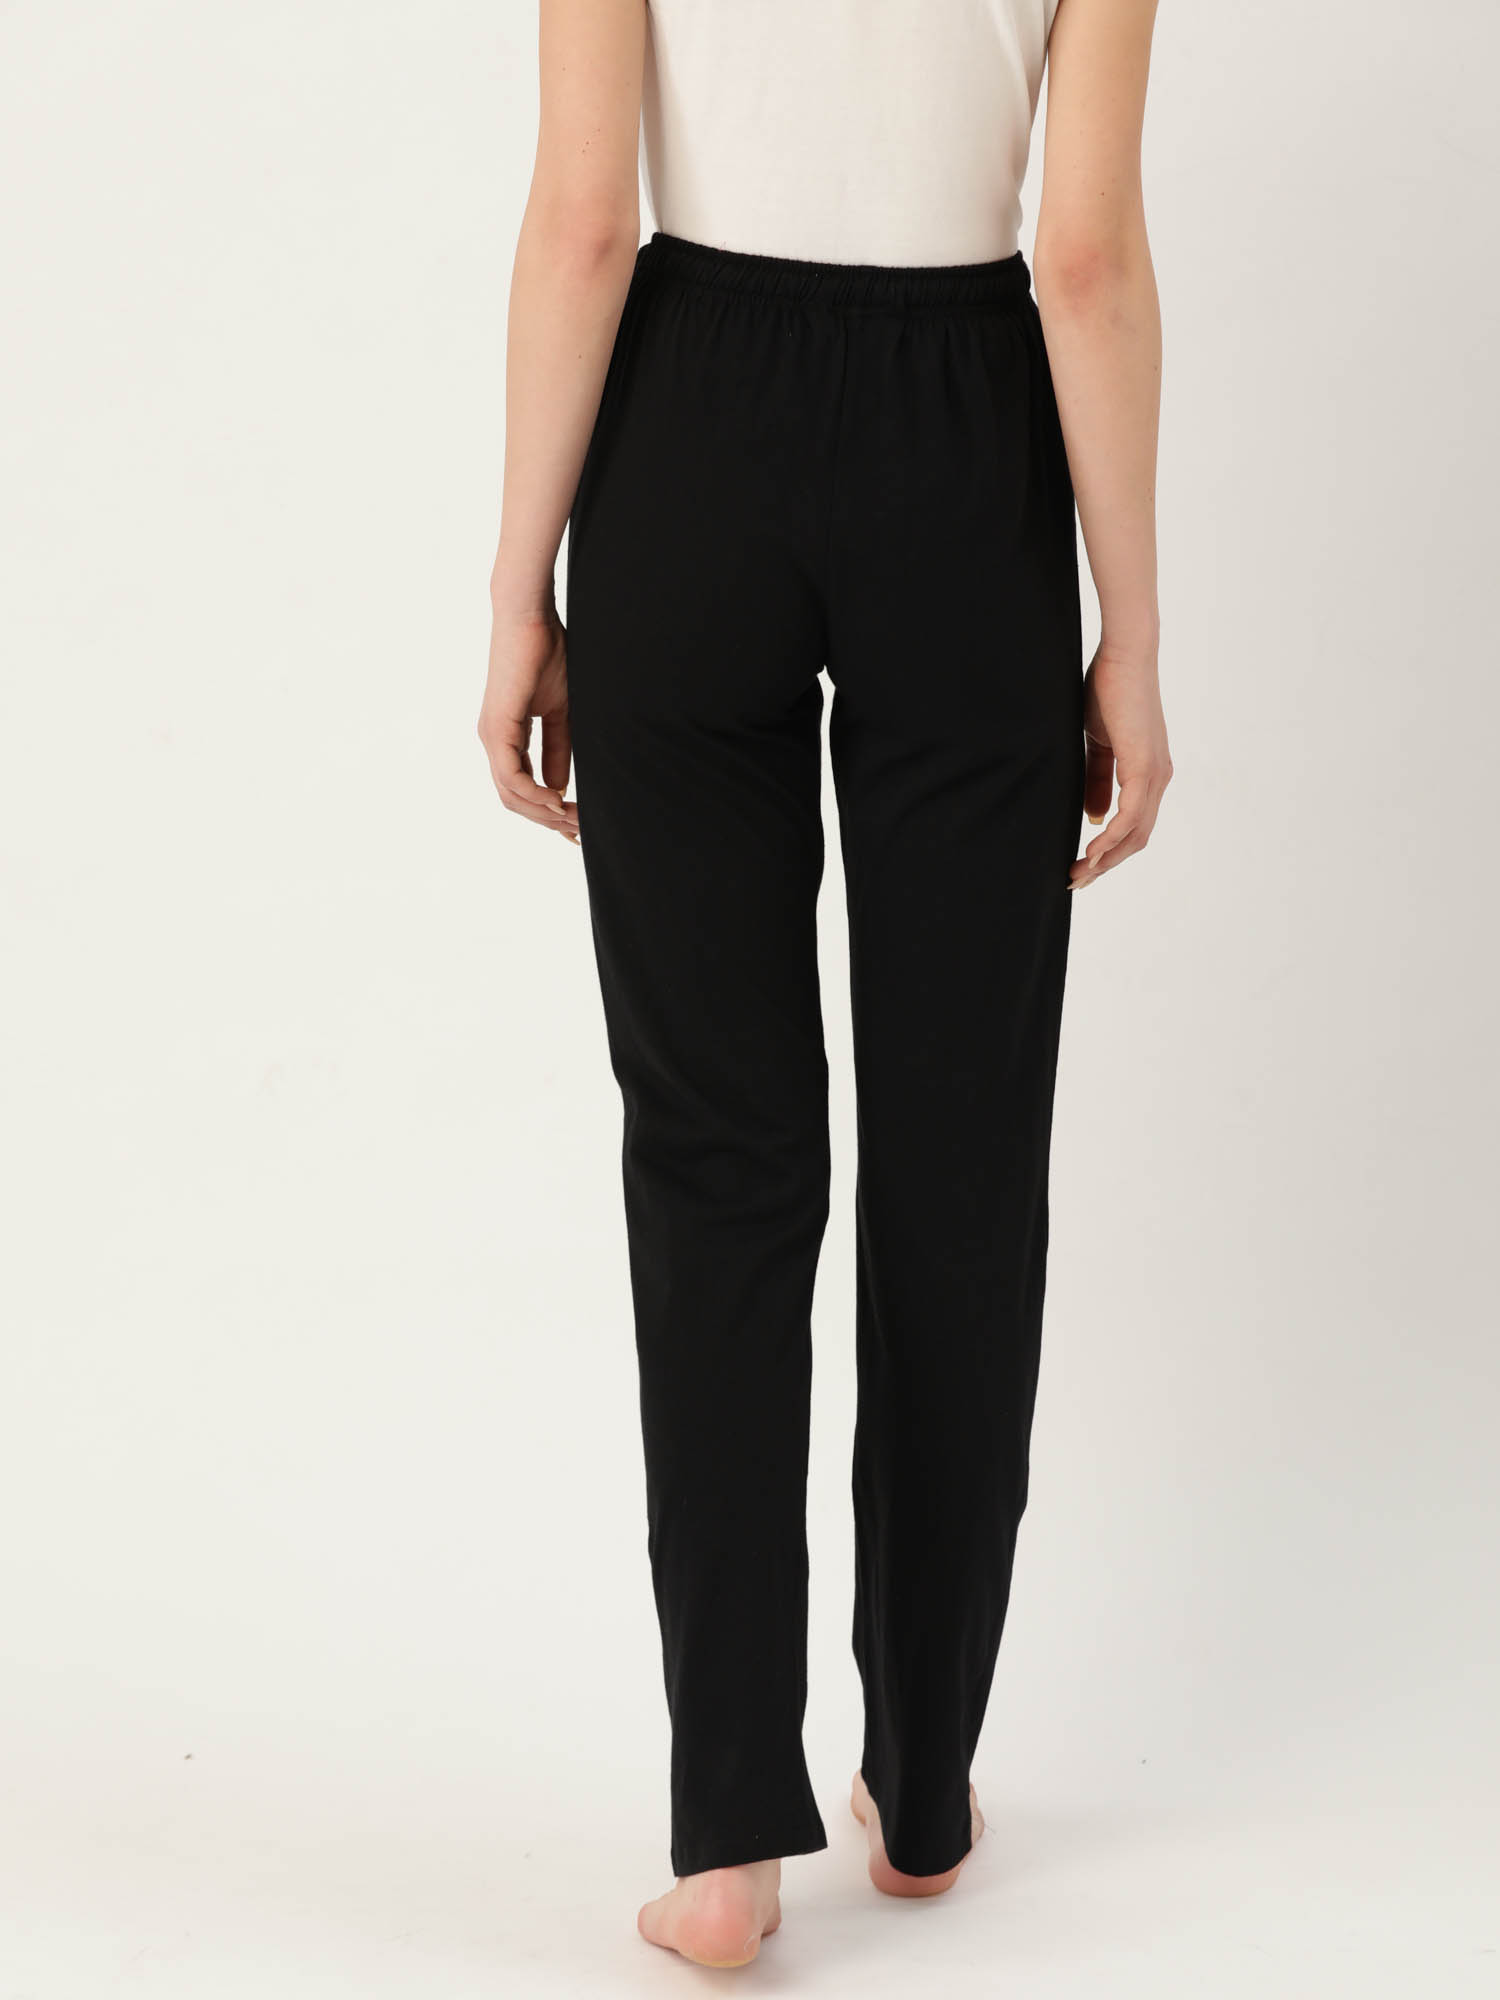 The Oprah-approved Spanx Perfect Black Pants Are on Sale